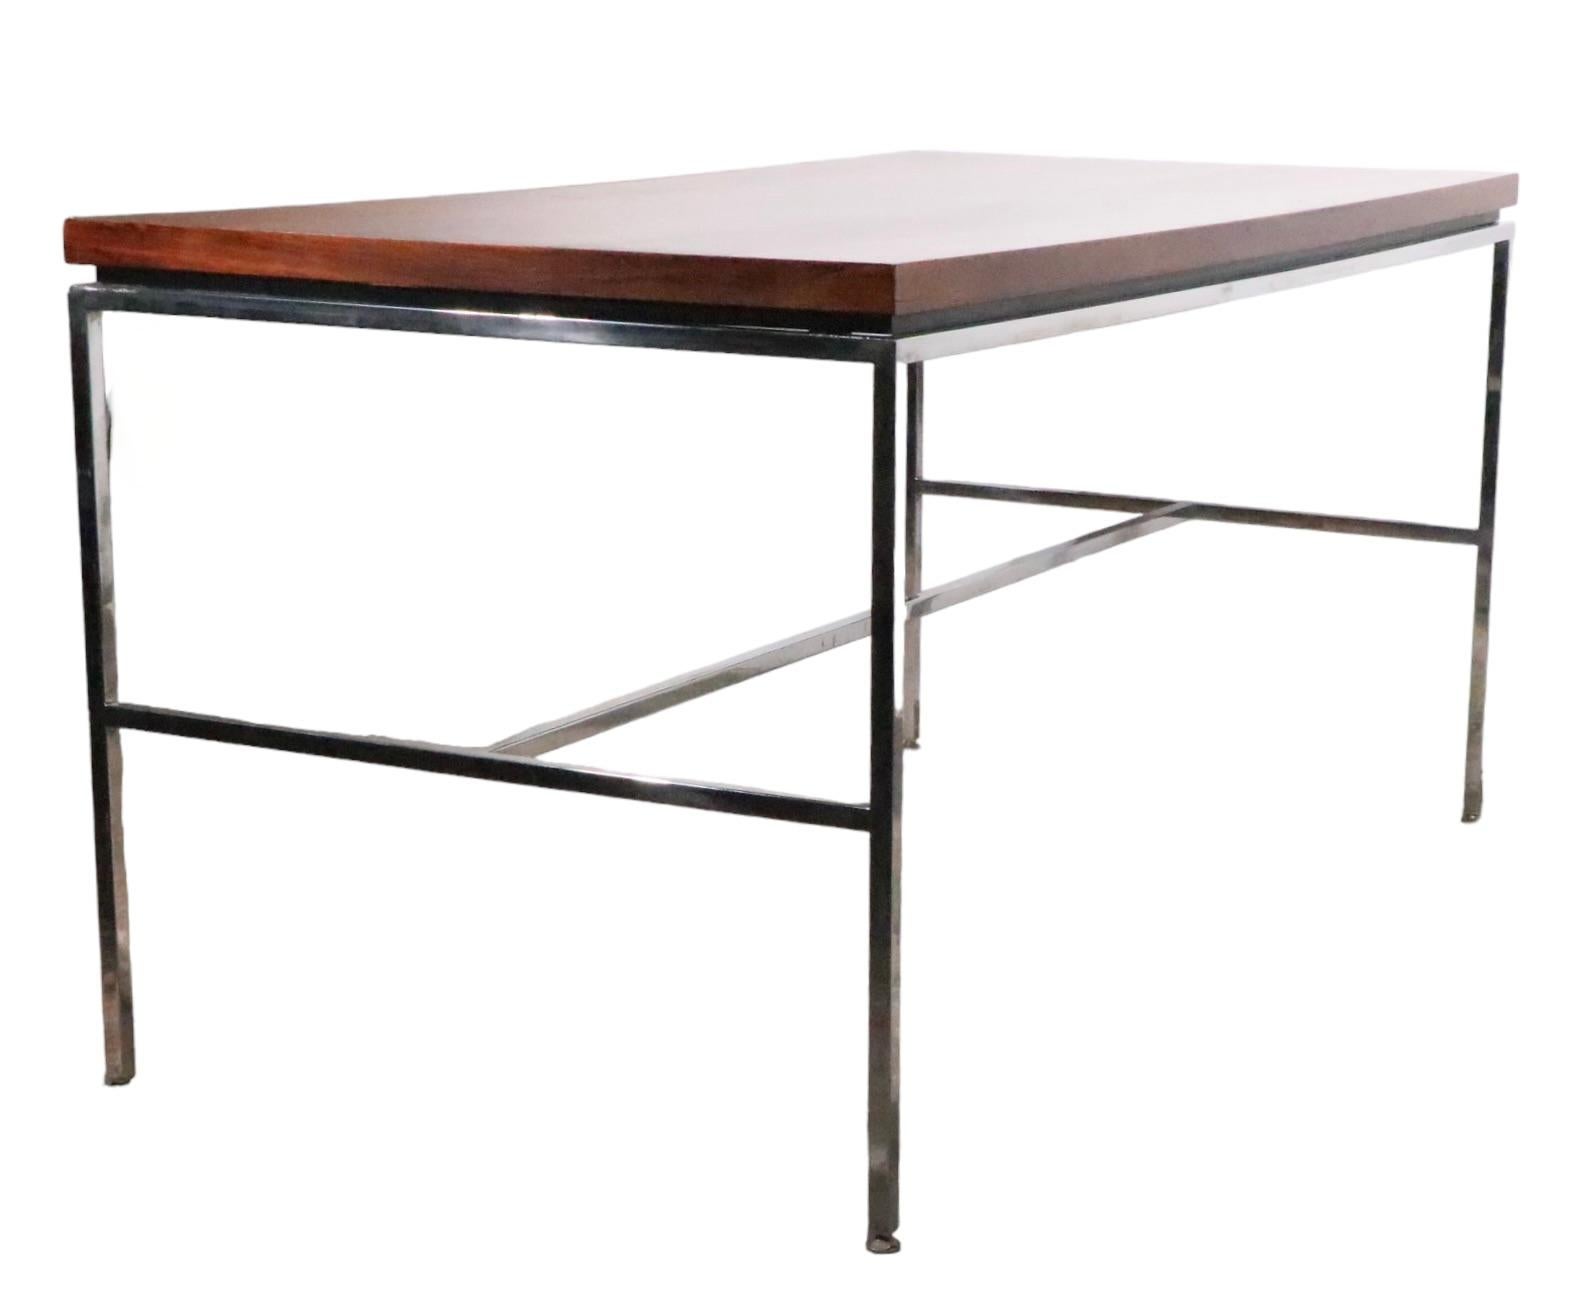 Stunning midcentury, Hollywood Regency, Post Modern design writing table, desk, made by Drexel as part of their Index series, possibly designed by Milo Baughman, circa 1960/1970s.
The desk features a rectangular rosewood top, on an architectural